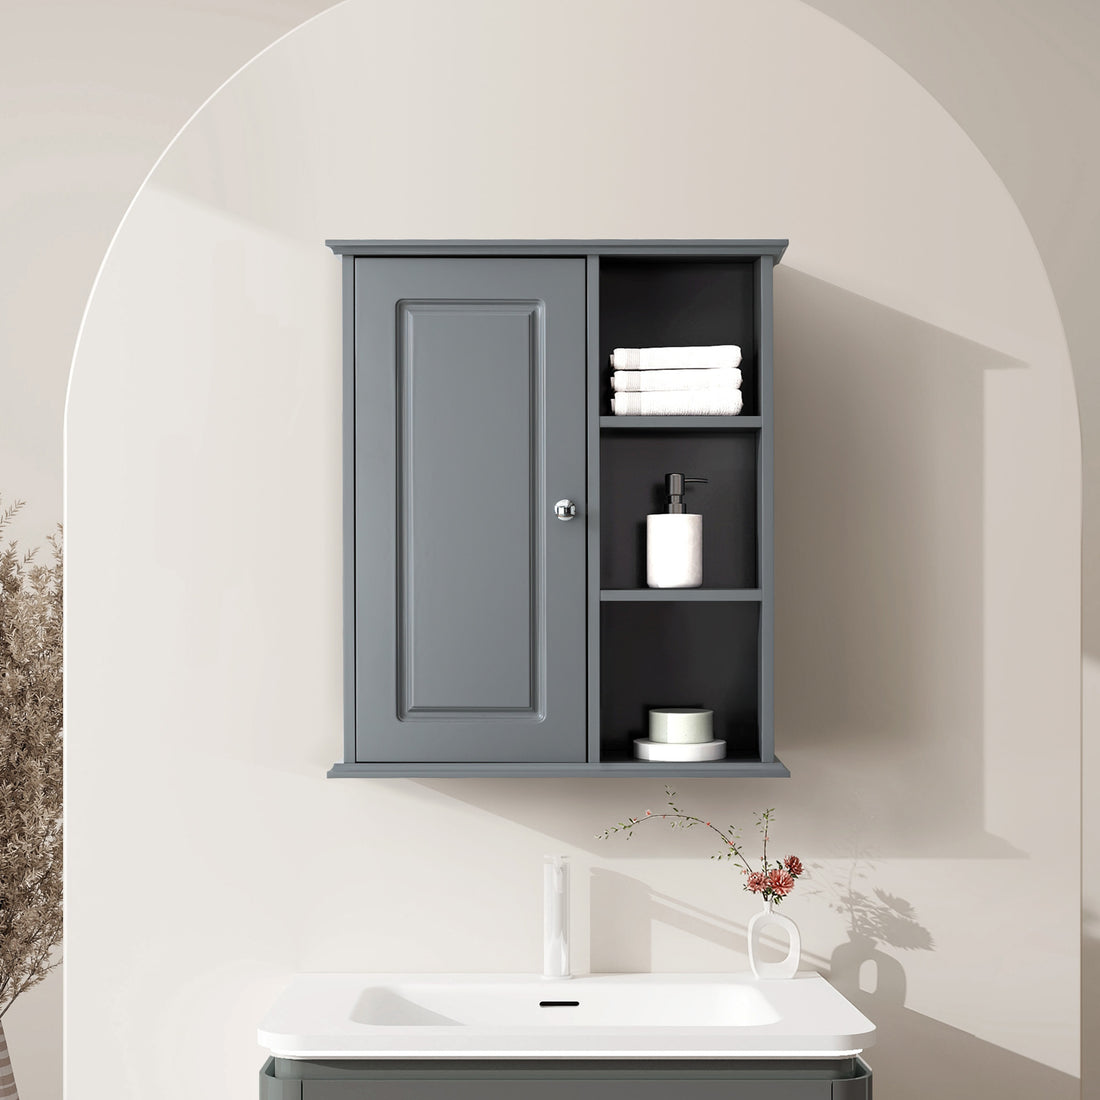 Bathroom Wall Cabinet in Black Ready to Assemble grey-1-3-soft close doors-wall